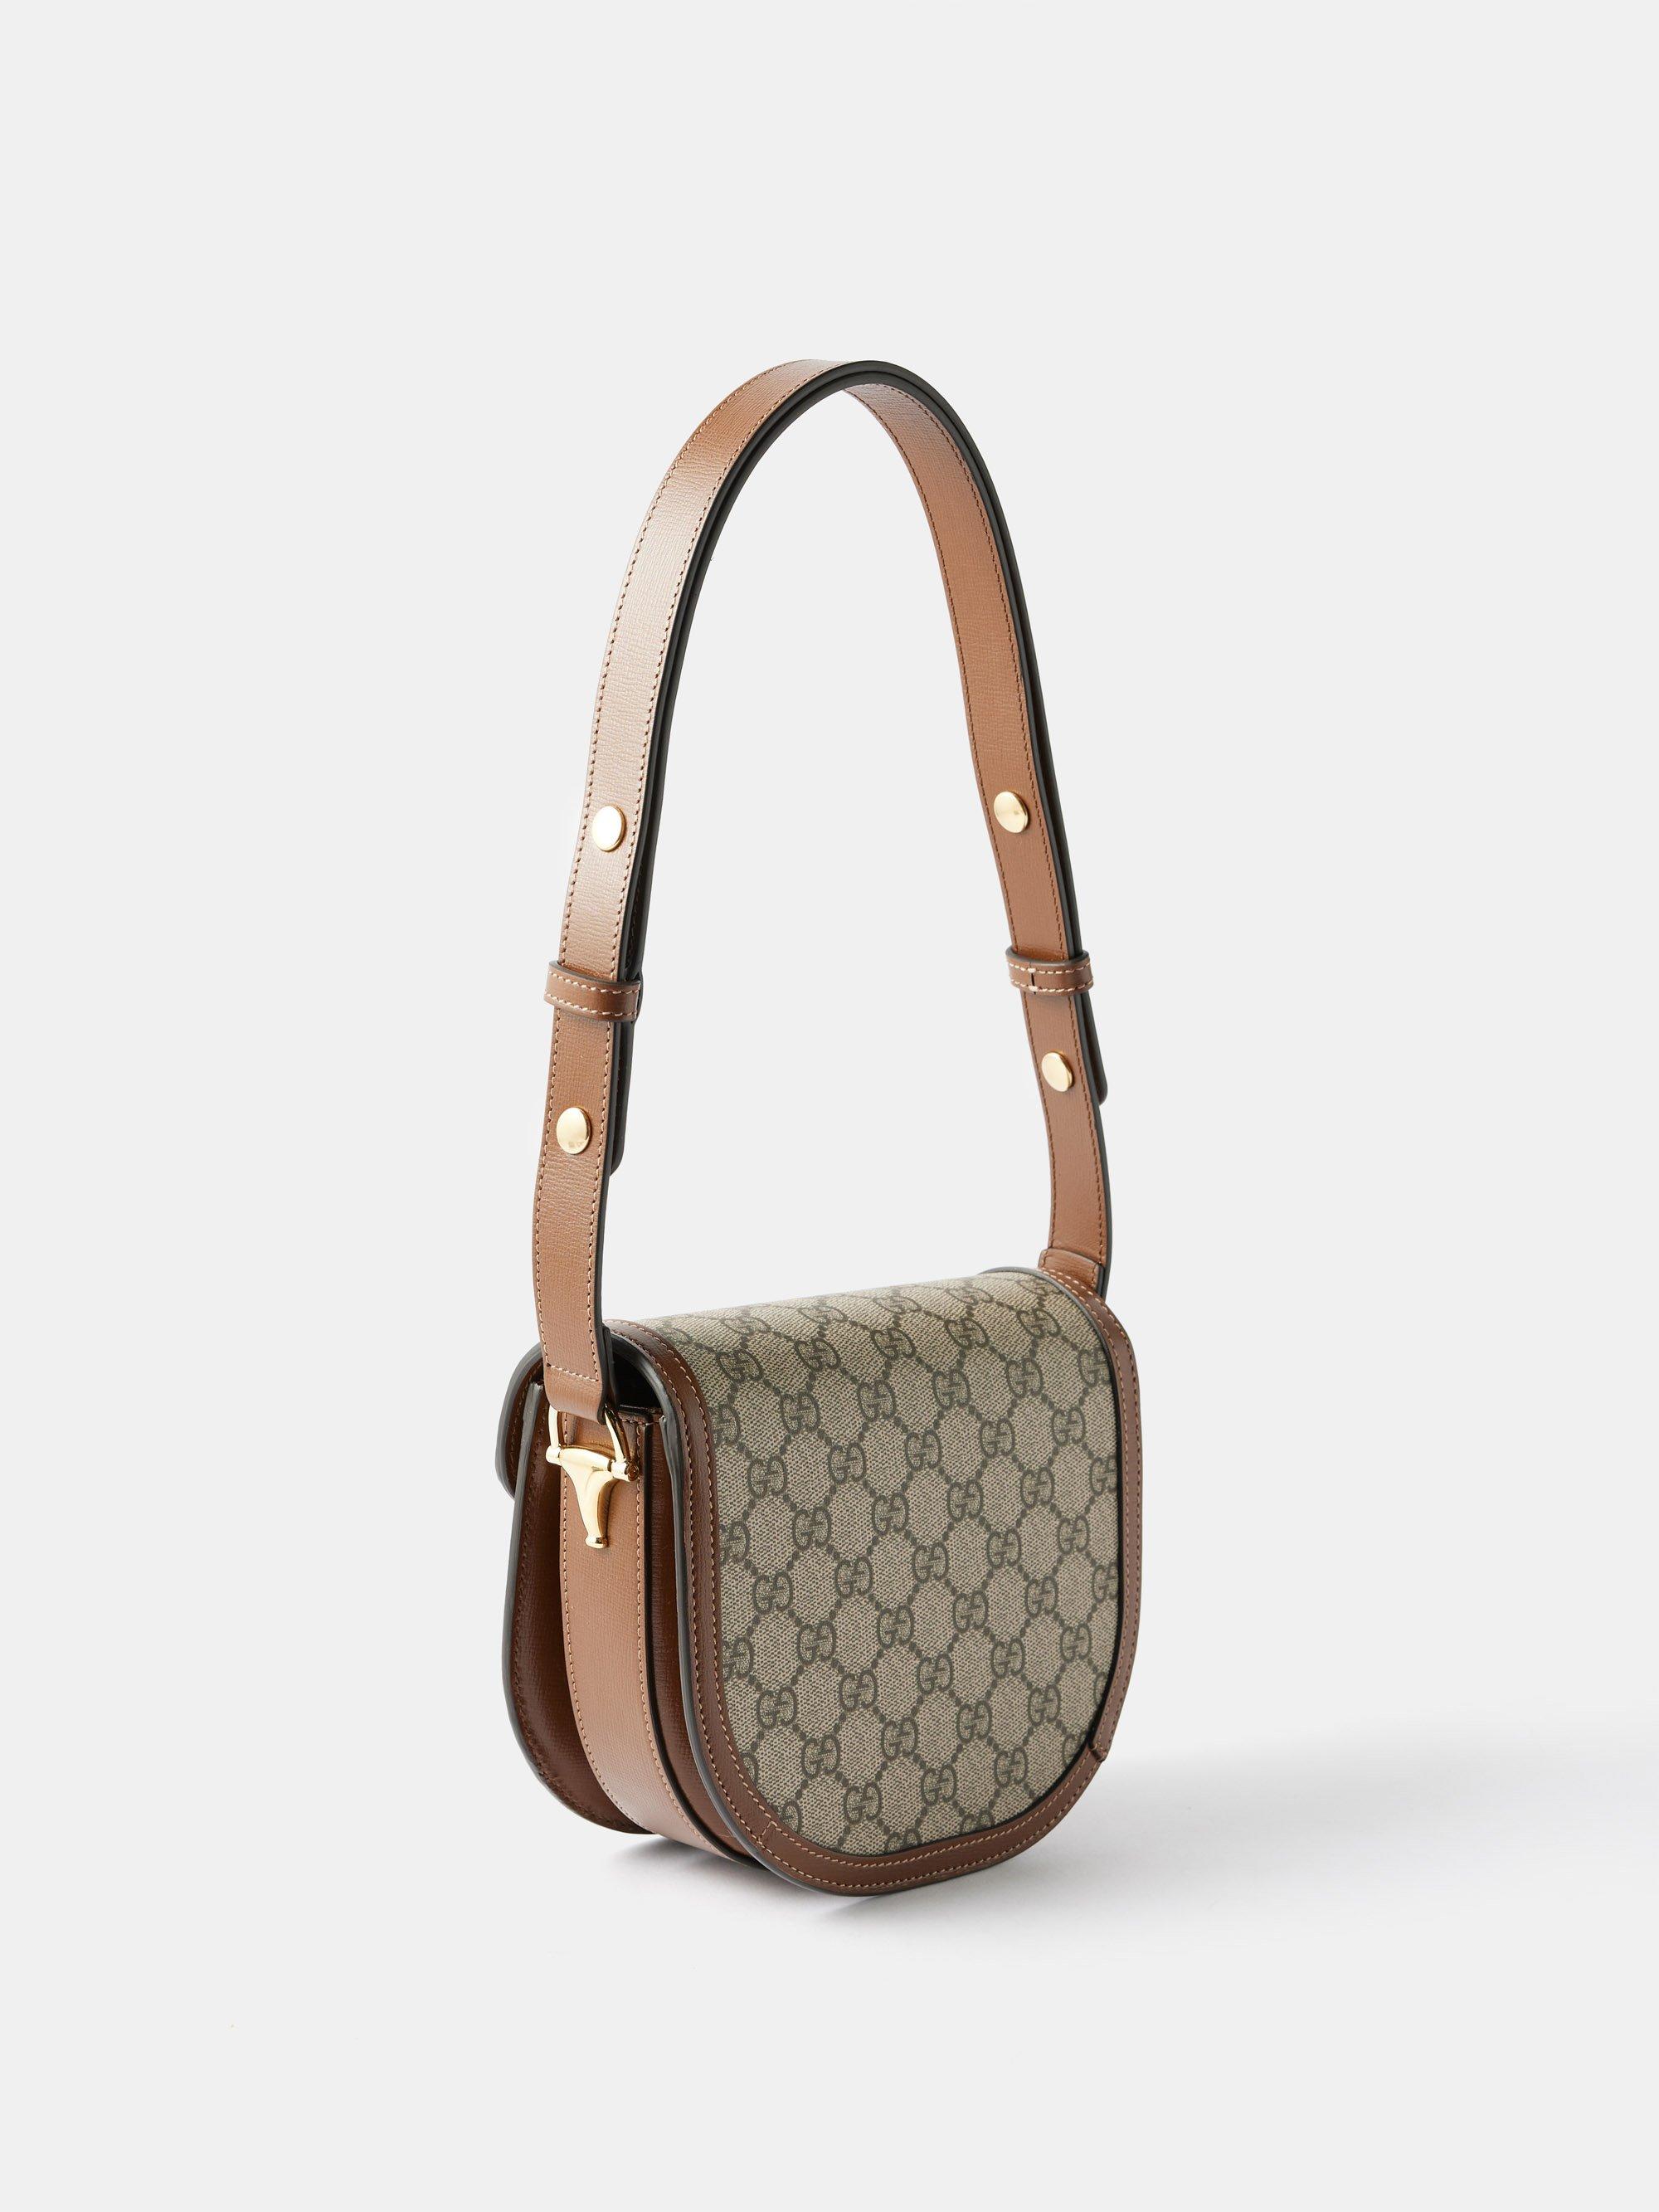 Gucci Horsebit 1955 small leather-trimmed printed coated-canvas shoulder bag - Women - Brown Cross-body Bags